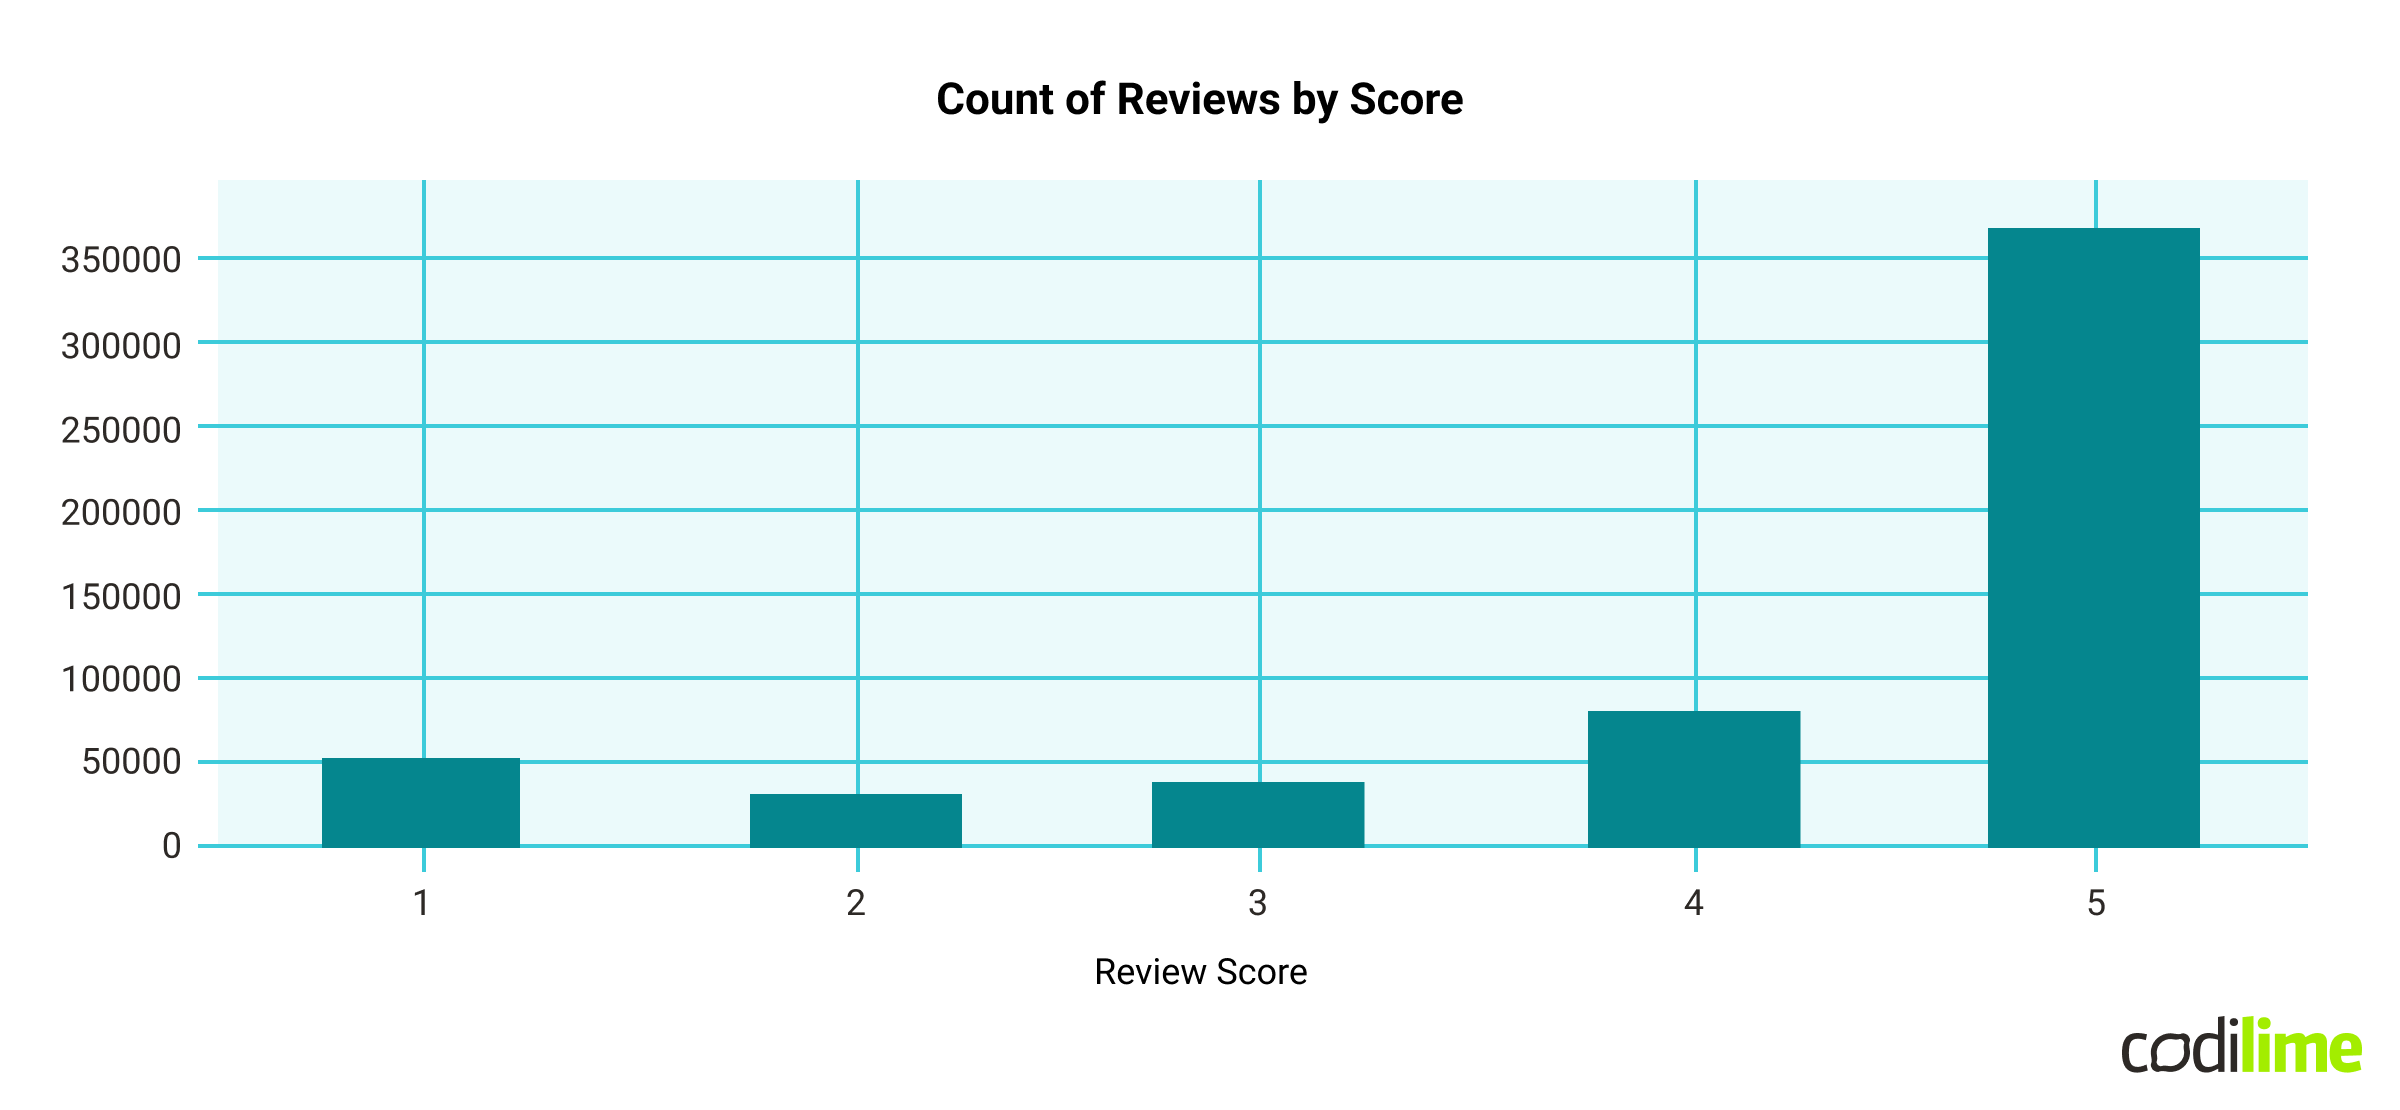 Count of reviews by score